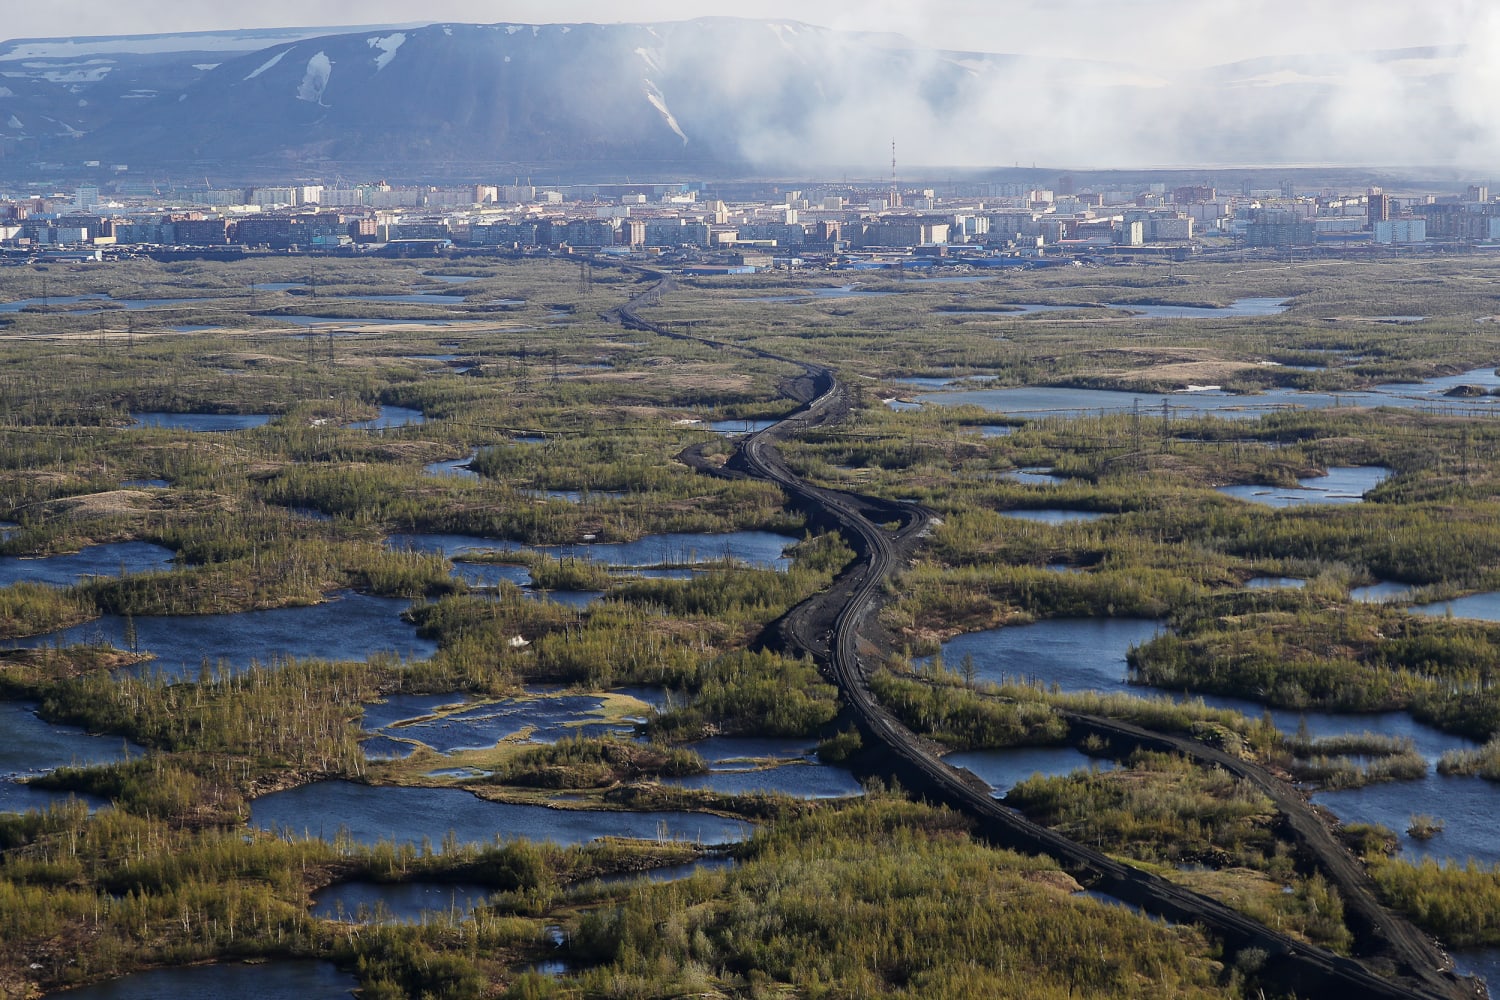 Barren forests, dirty rivers, unbreathable air: Inside an Arctic city’s vast pollution problem